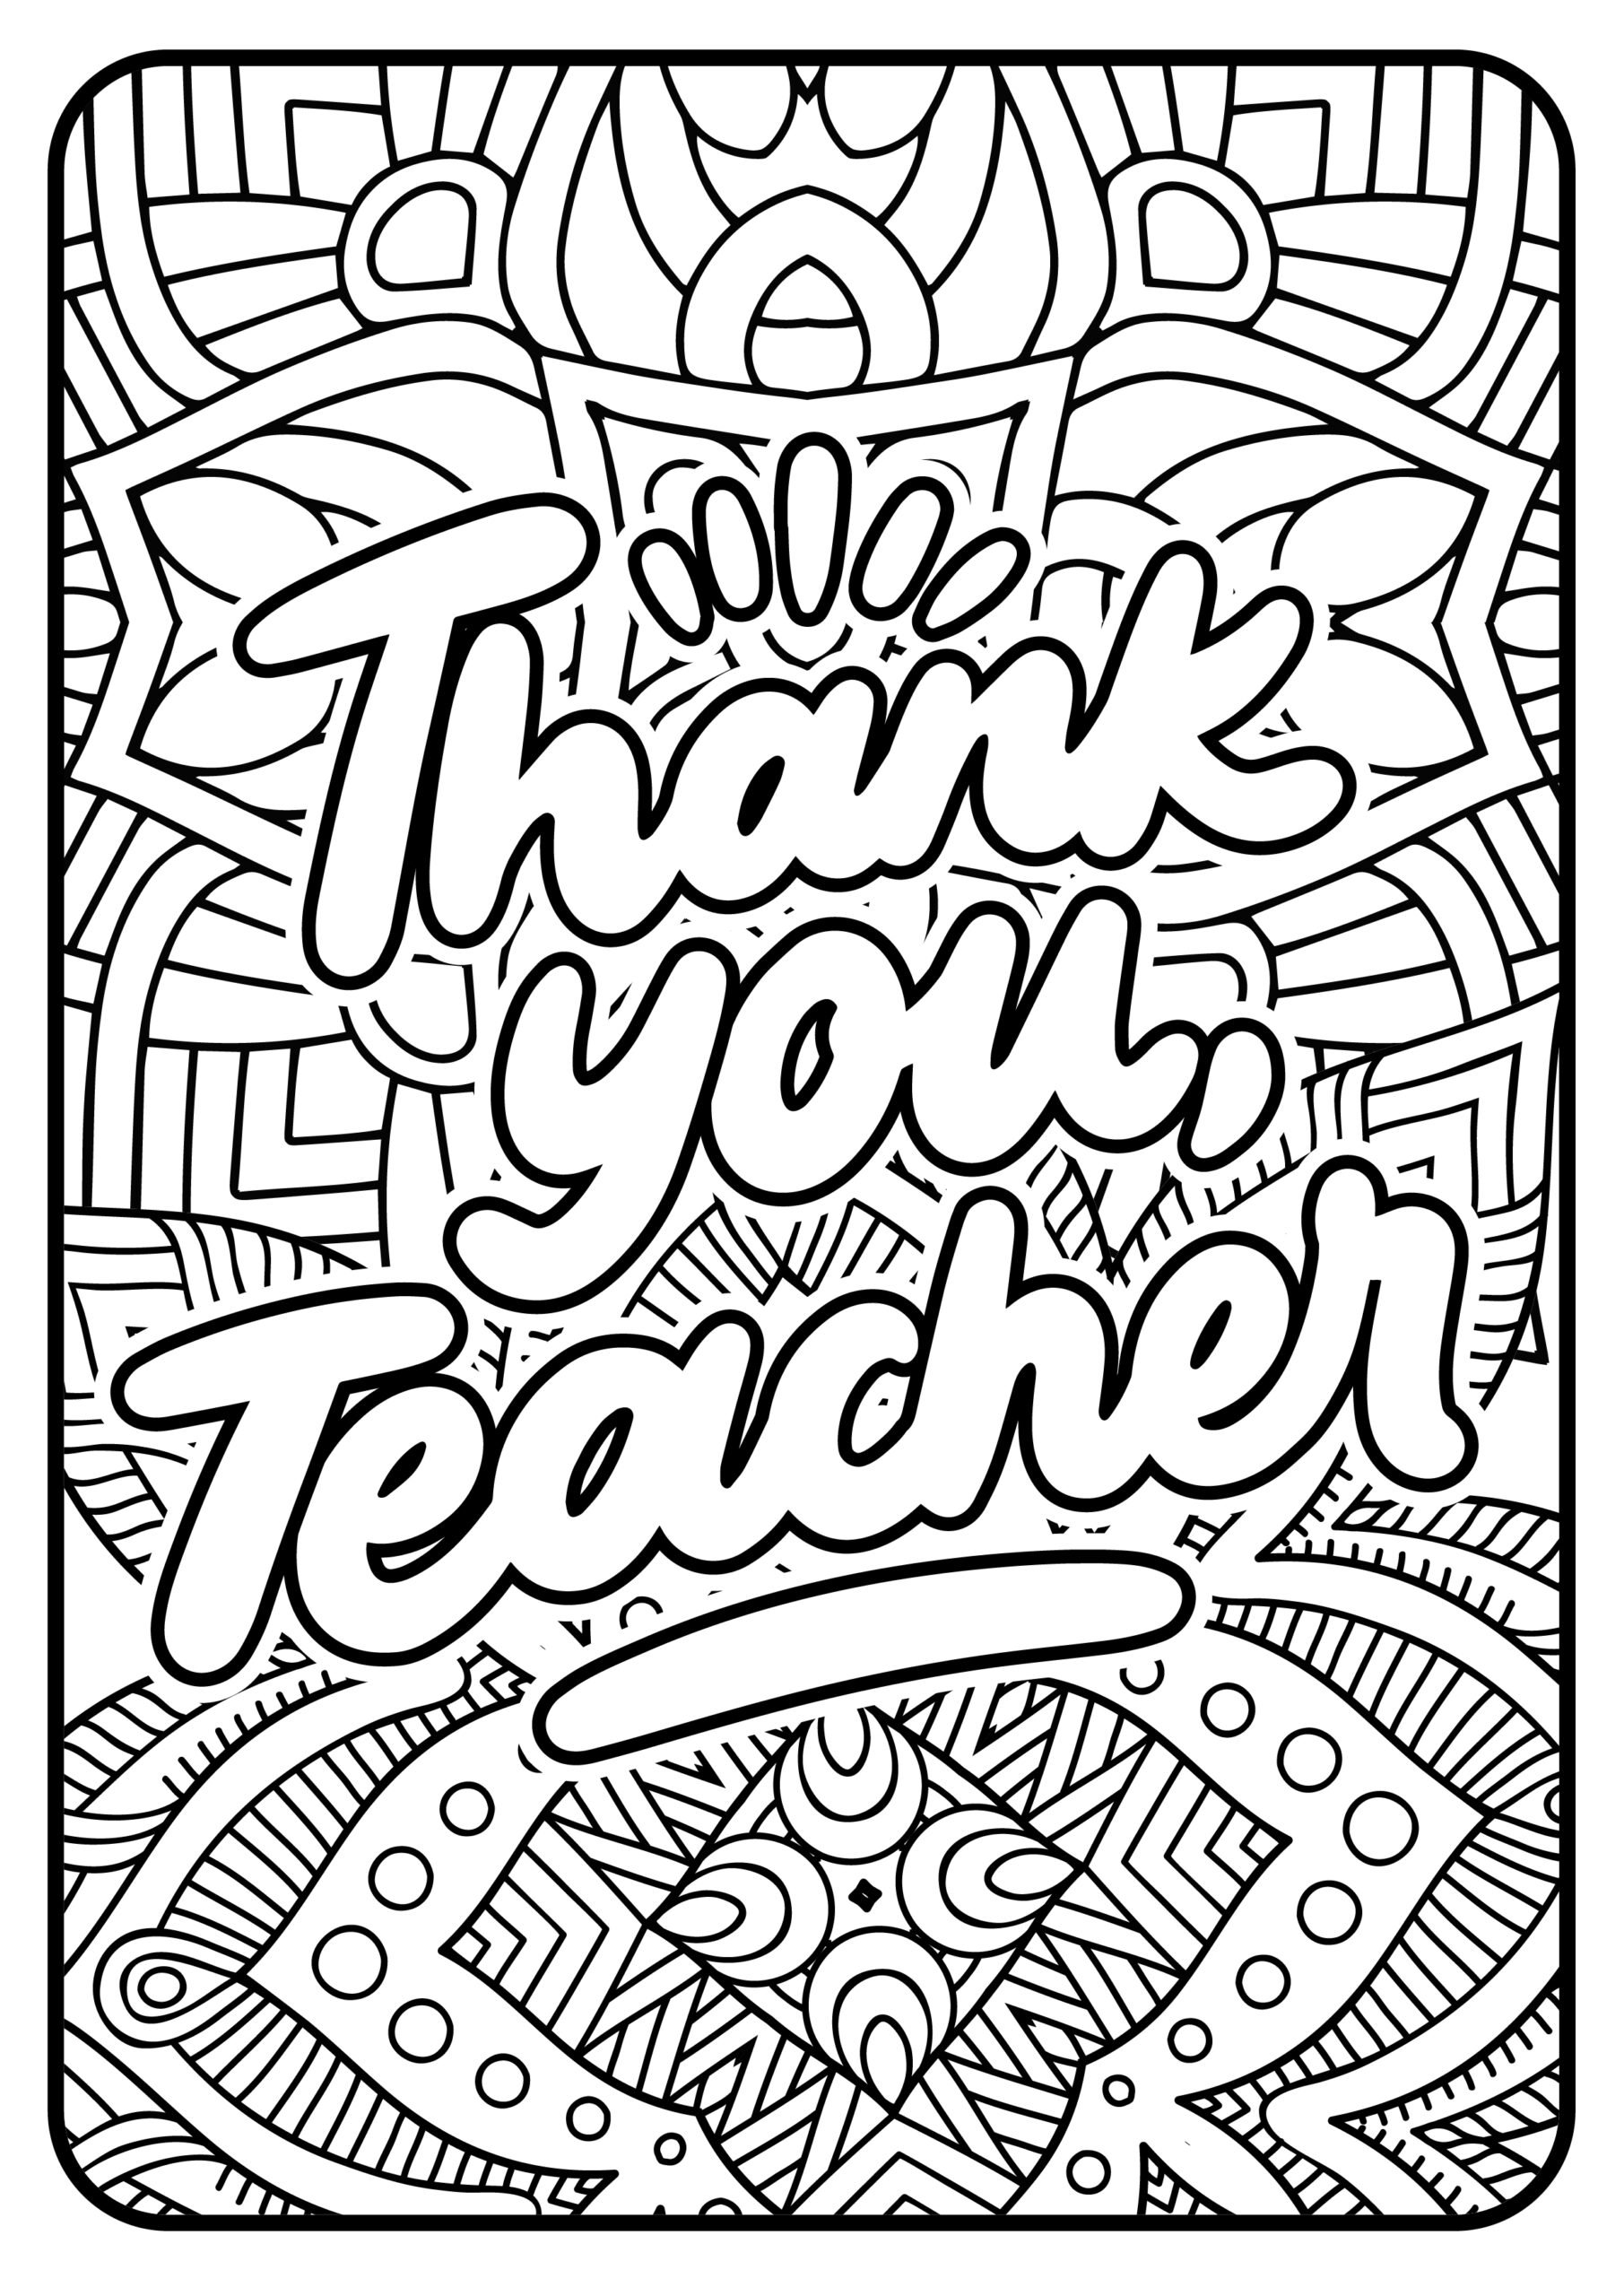 black and white teacher appreciation coloring page